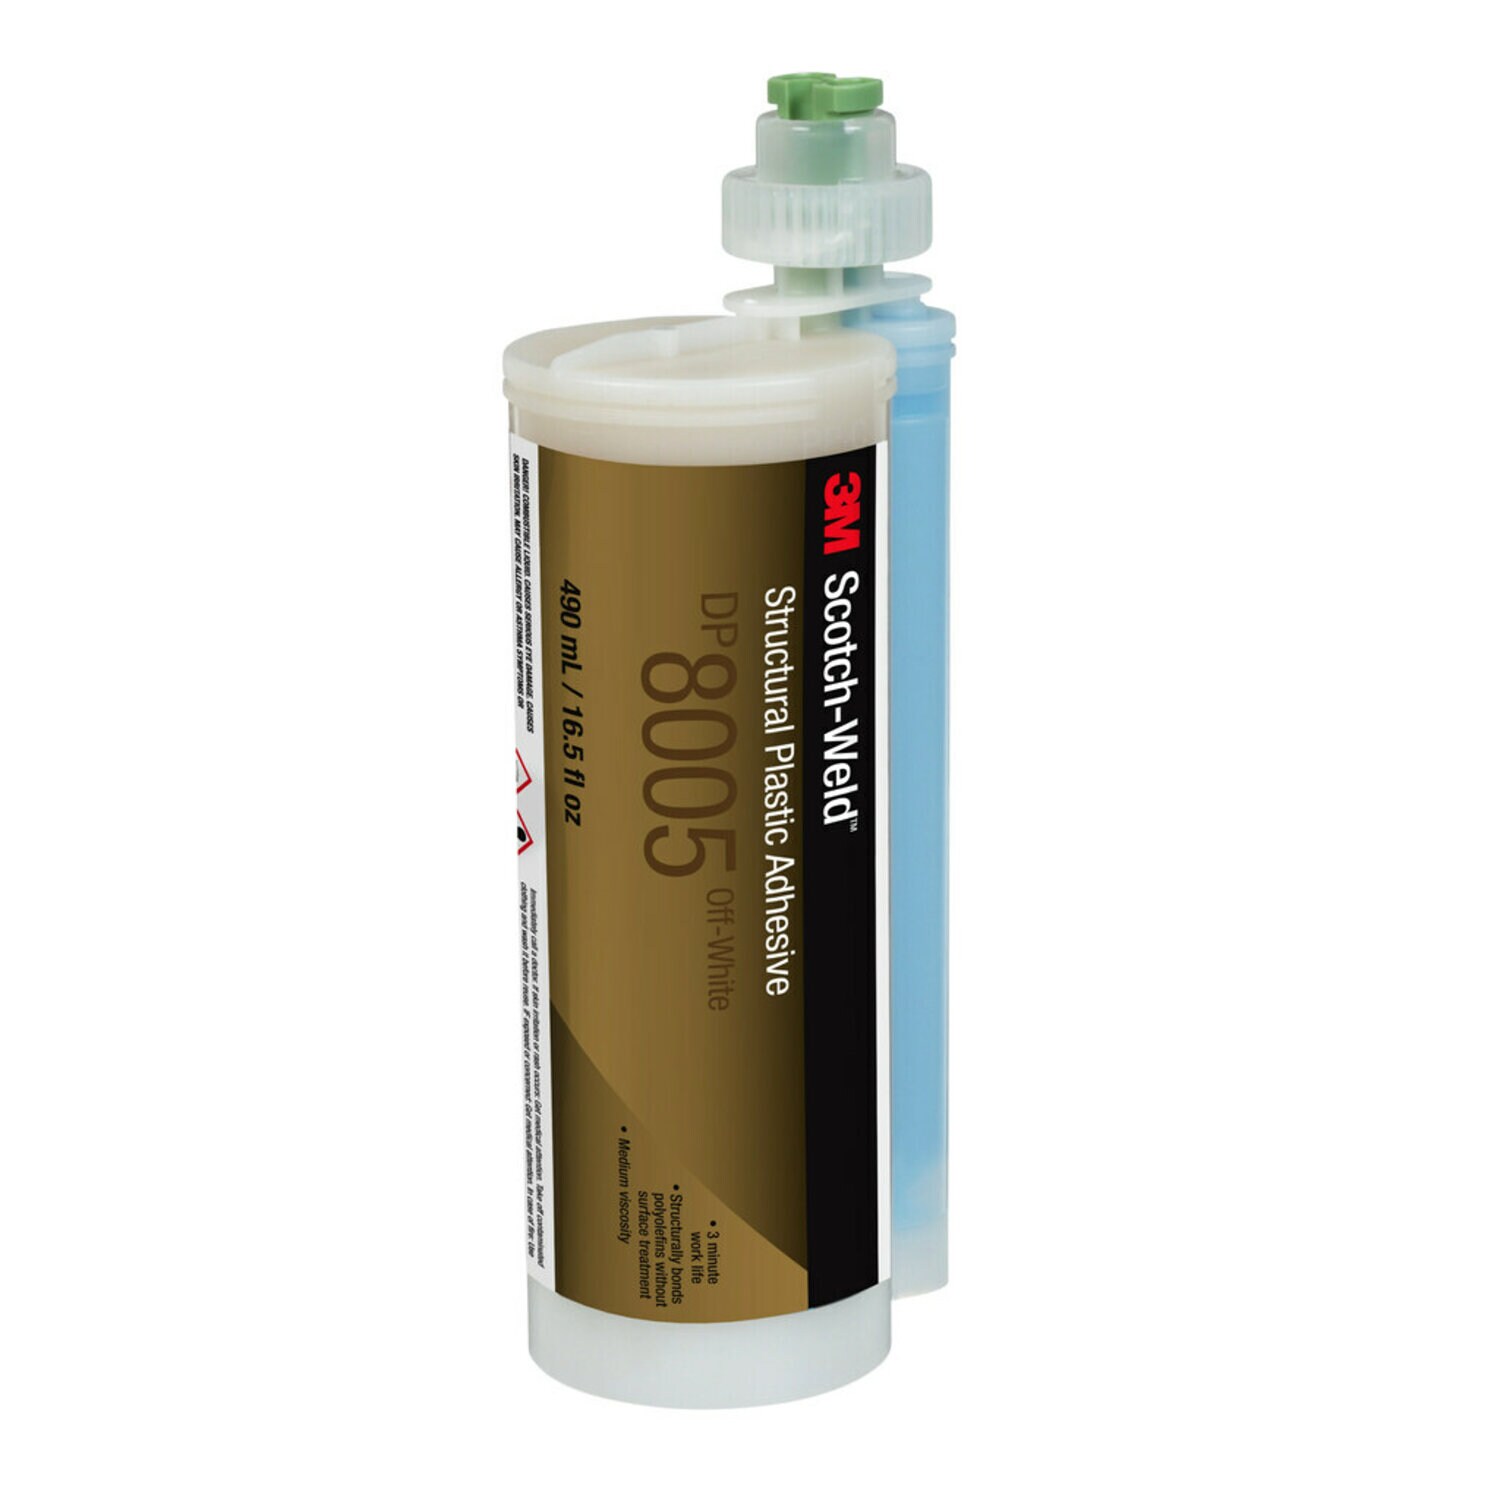 7100090196 - 3M Scotch-Weld Structural Plastic Adhesive DP8005, Off-White, 490 mL
Duo-Pak, 6/case